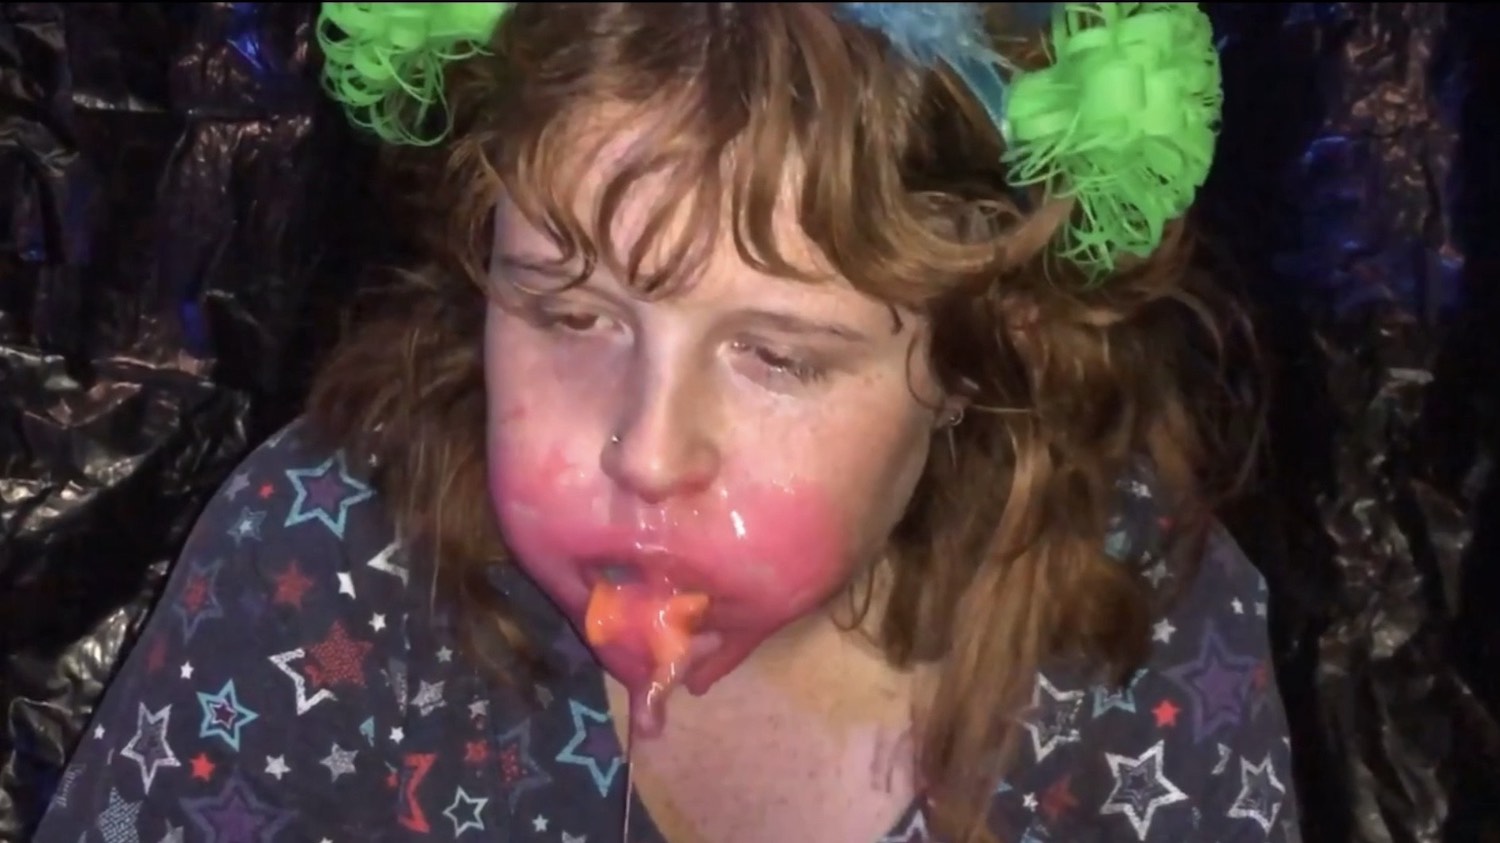 girl with a pink substance smeared across her mouth with her mouth full